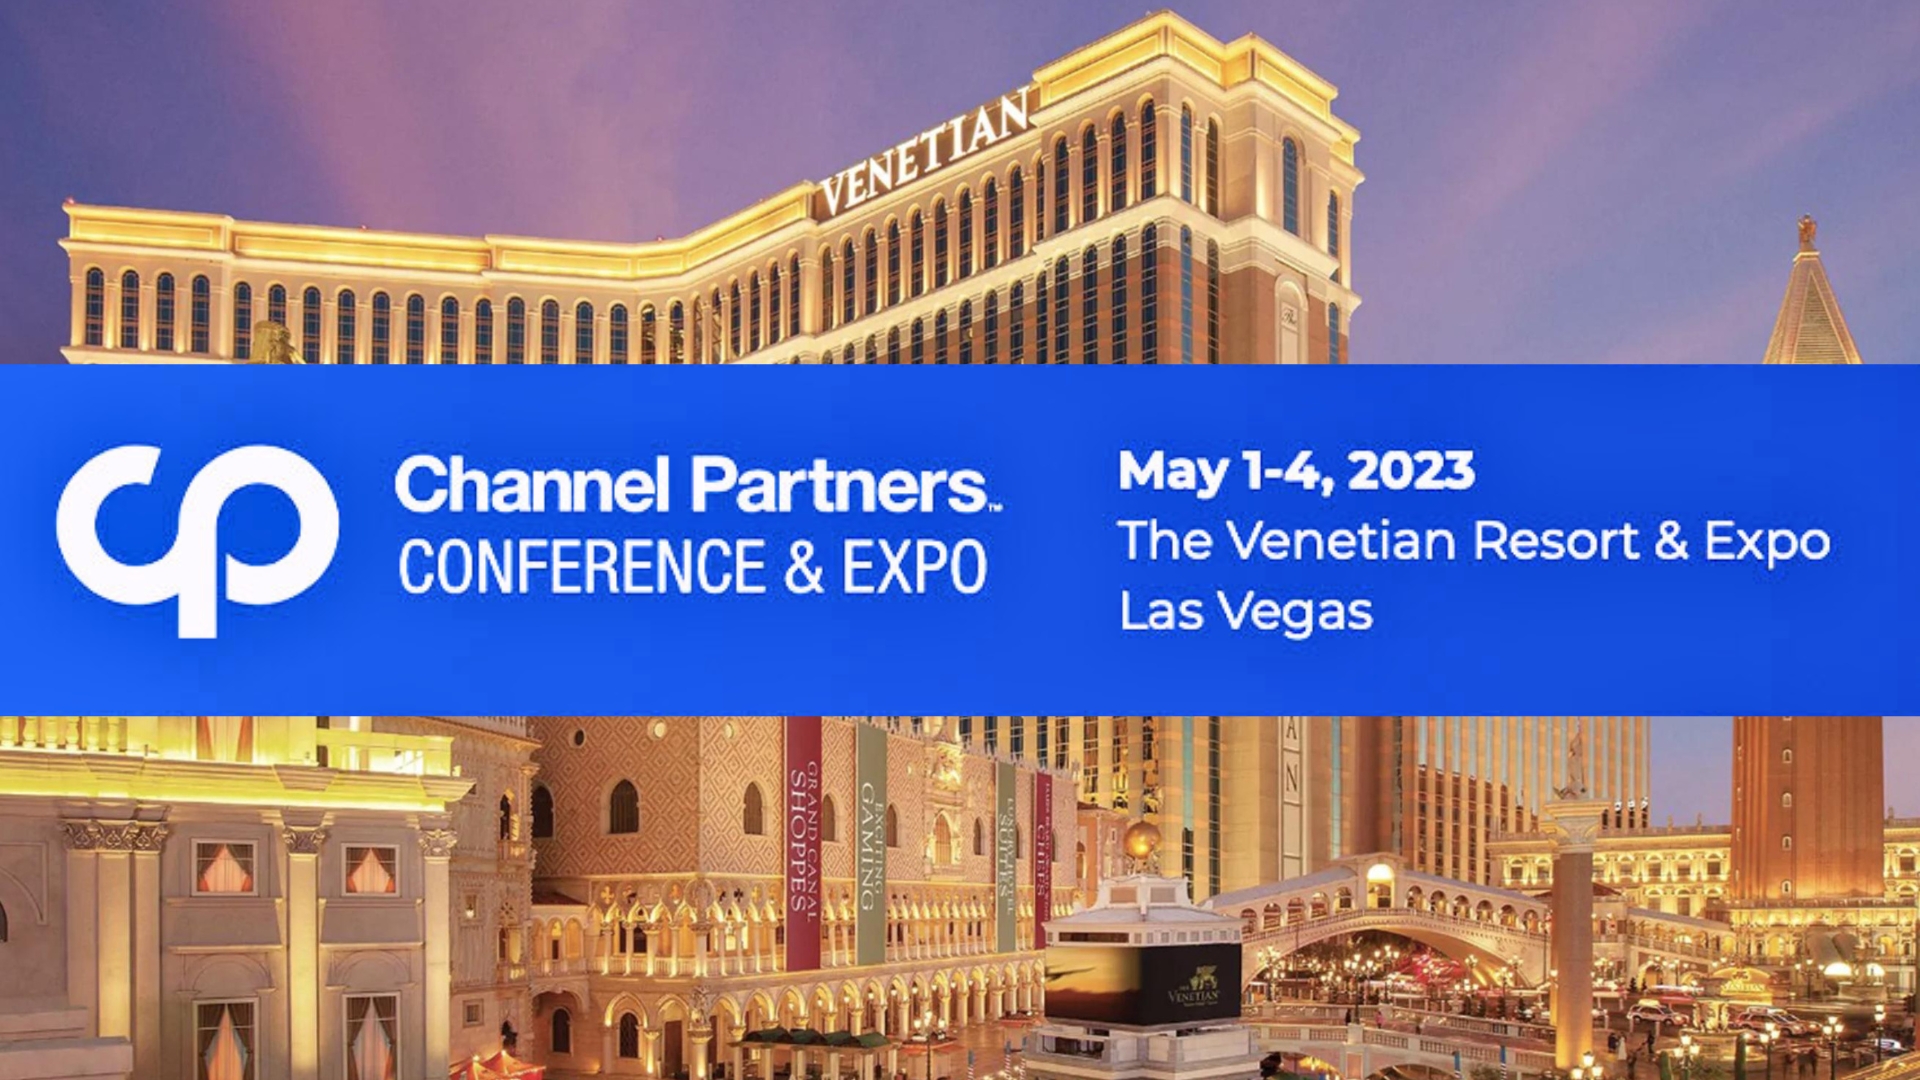 Channel Partners Conference & Expo Las Vegas Pia